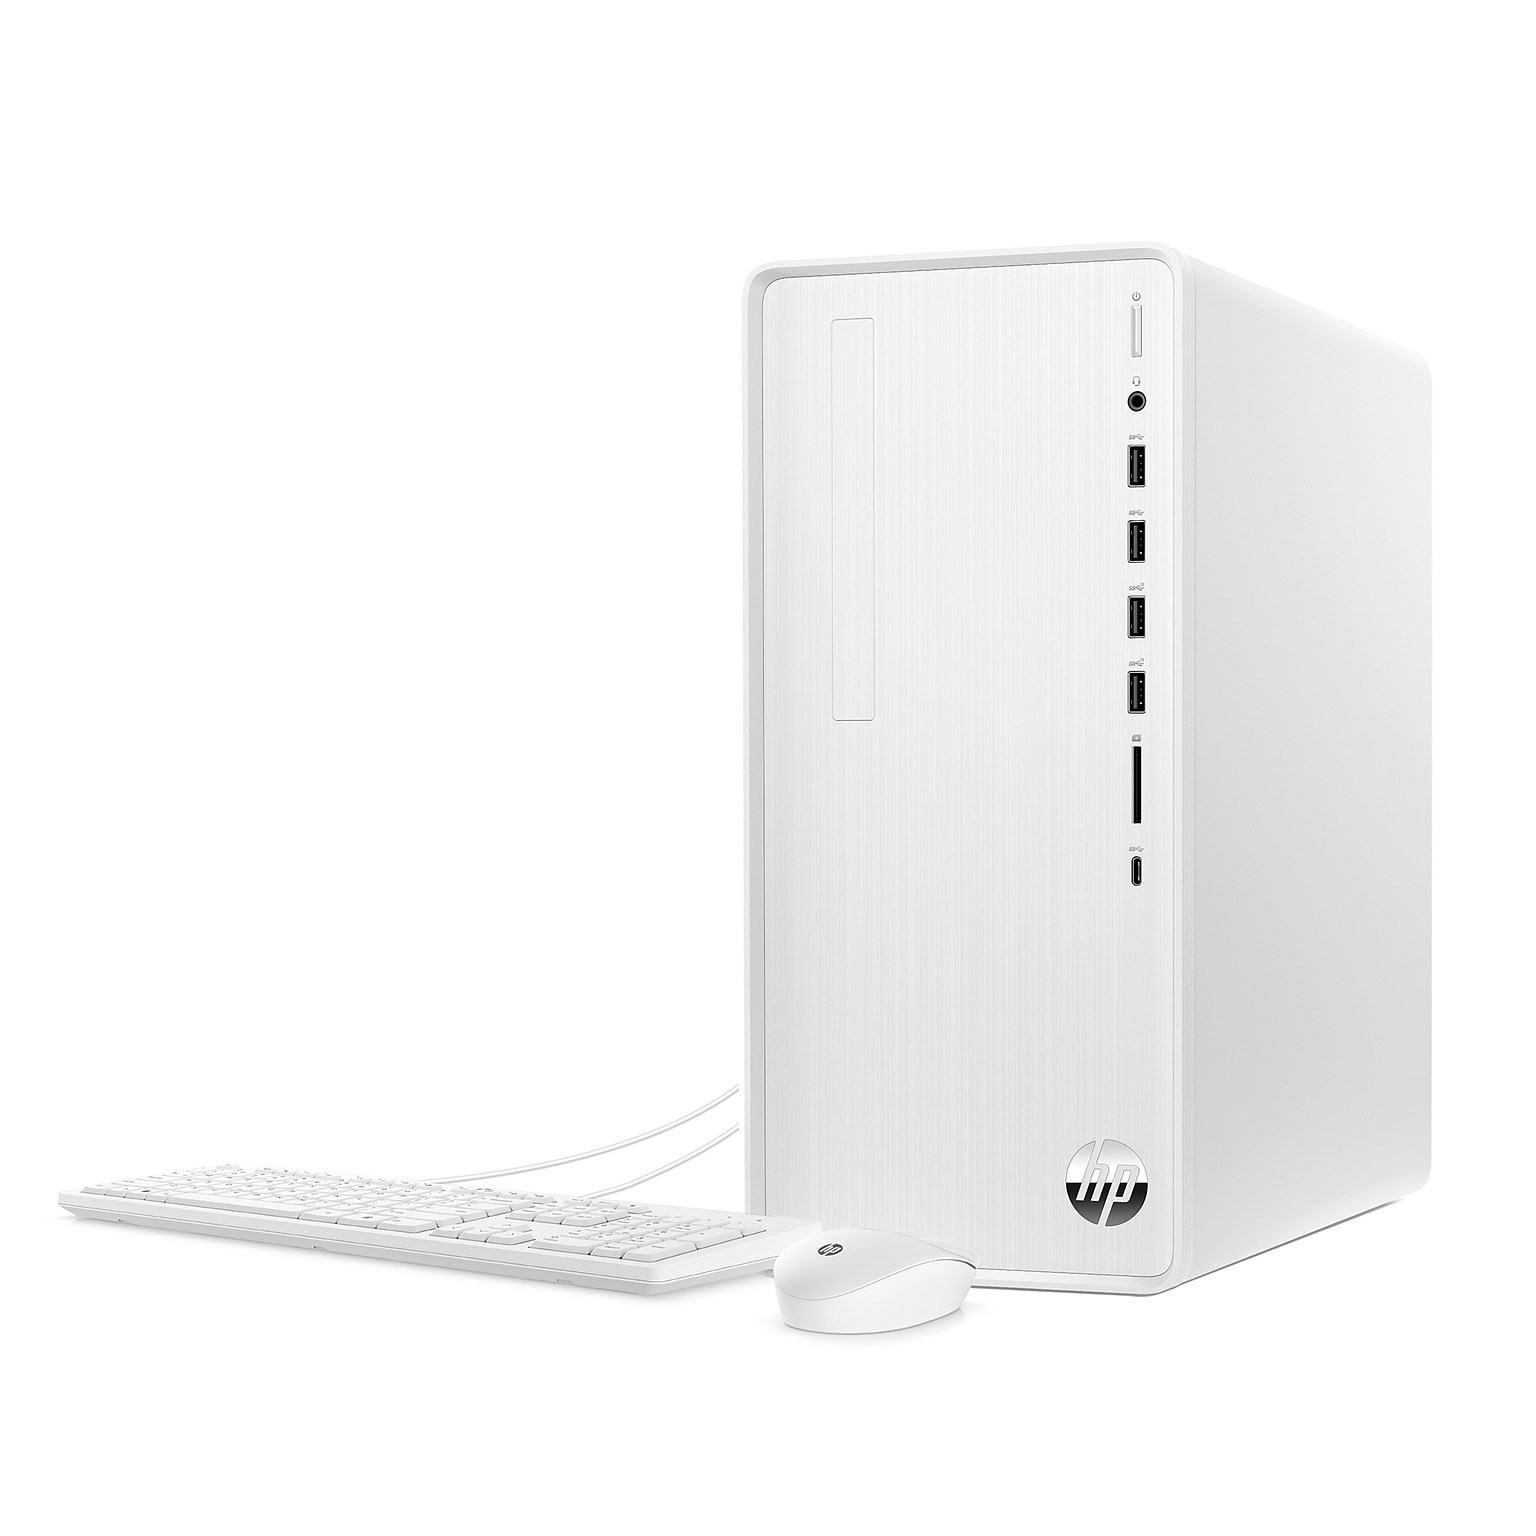 HP Pavilion Desktop Computer, Intel Core i5-12400, 12GB RAM, 256GB SSD, Mouse & Keyboard Included, Windows 11 Home